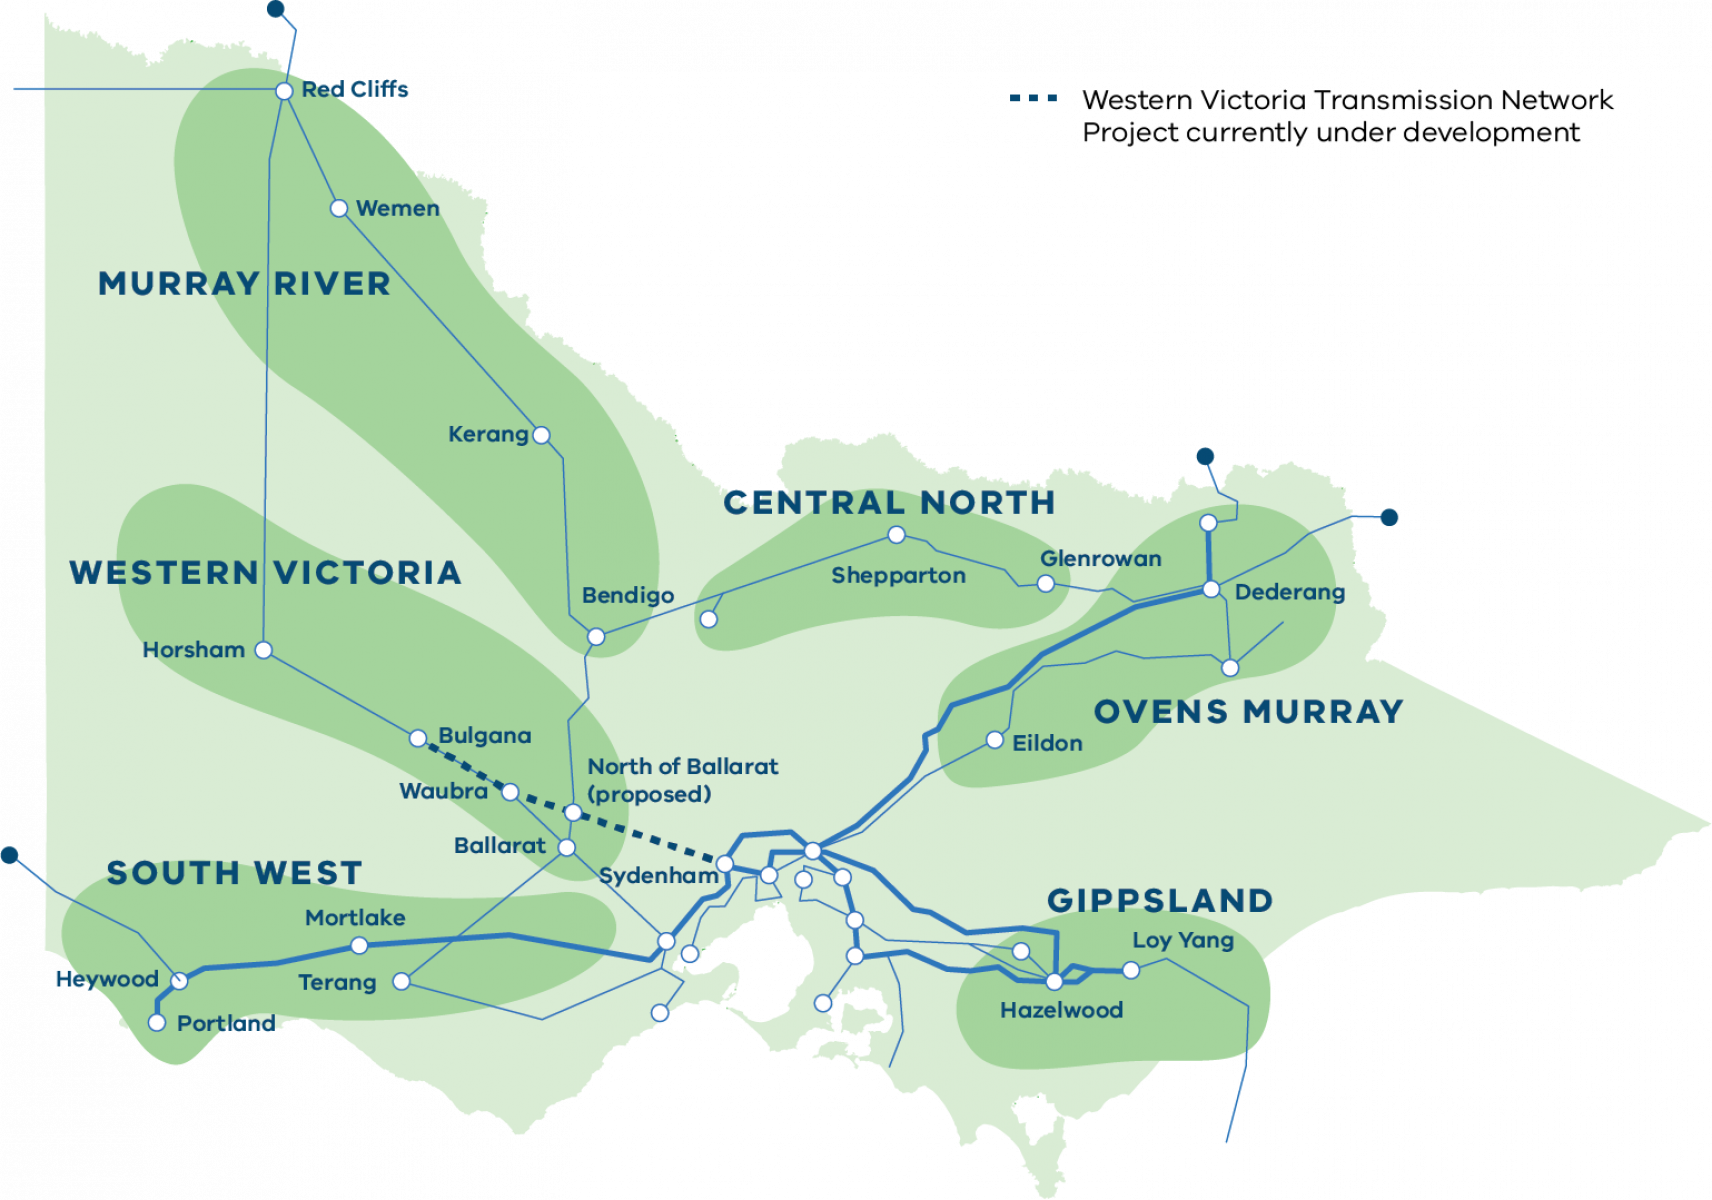 Map of Victorian REZs. There are 6 identified REZs -  Central North, Gippsland , Murray River,  Ovens Murray, South Victoria, Western Victoria